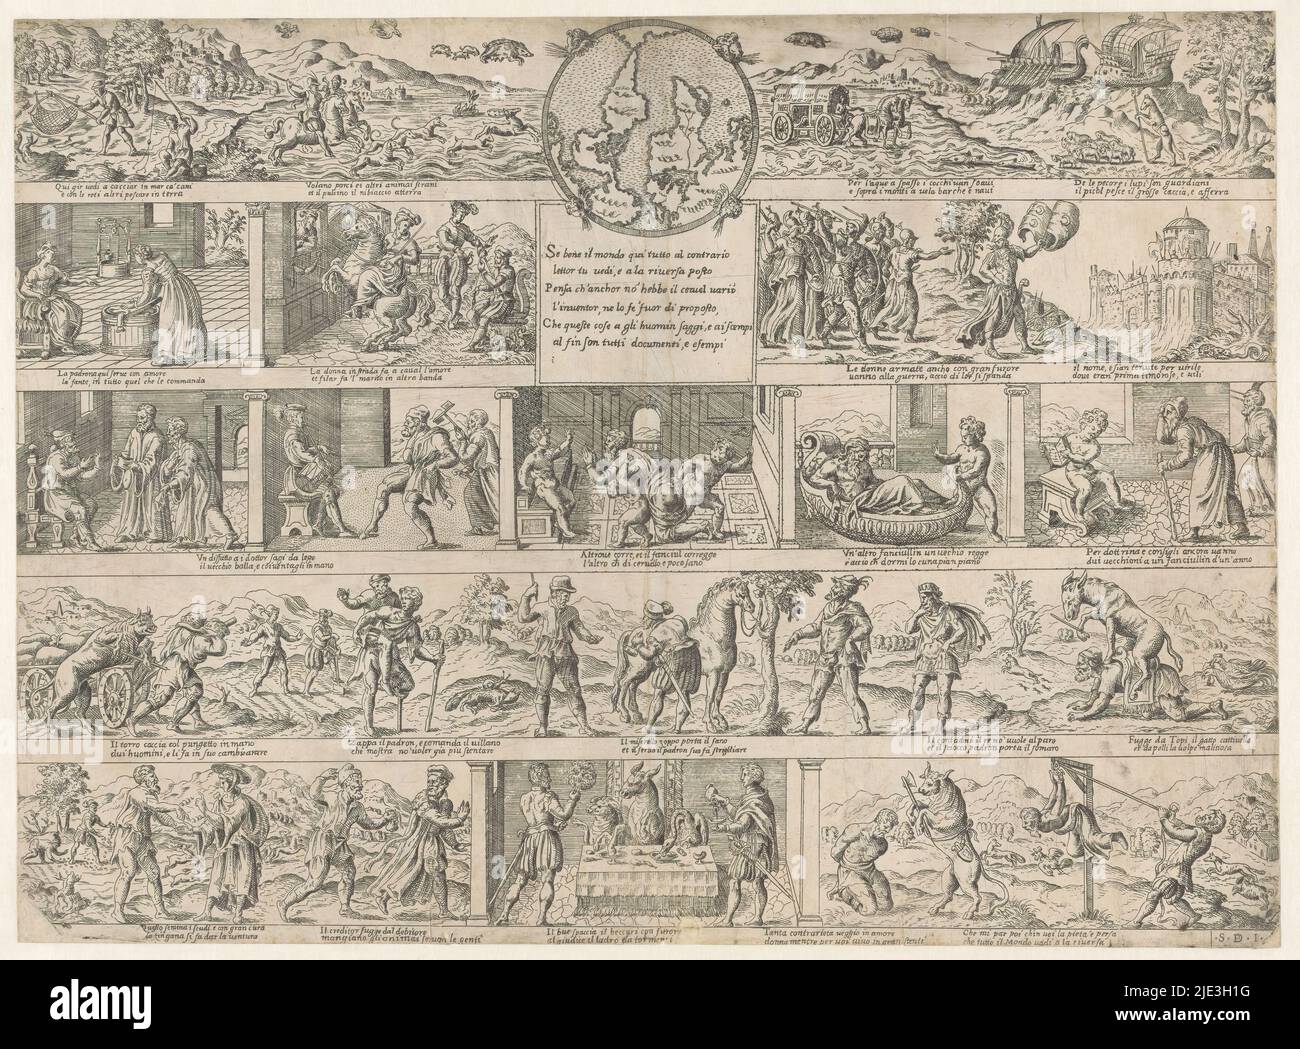 Wrong World, Se bene il mondo qui tutto al contrario (title on object), Sheet showing in five strips all kinds of representations of life in the wrong or inverted world. Here animals and people swap places, activities from the land to the sea and vice versa, the roles of parents and children and of masters and servants are reversed. All with captions in Italian., print maker: Etienne Dupérac, (mentioned on object), Venice, c. 1560, paper, etching, height 371 mm × width 508 mm Stock Photo